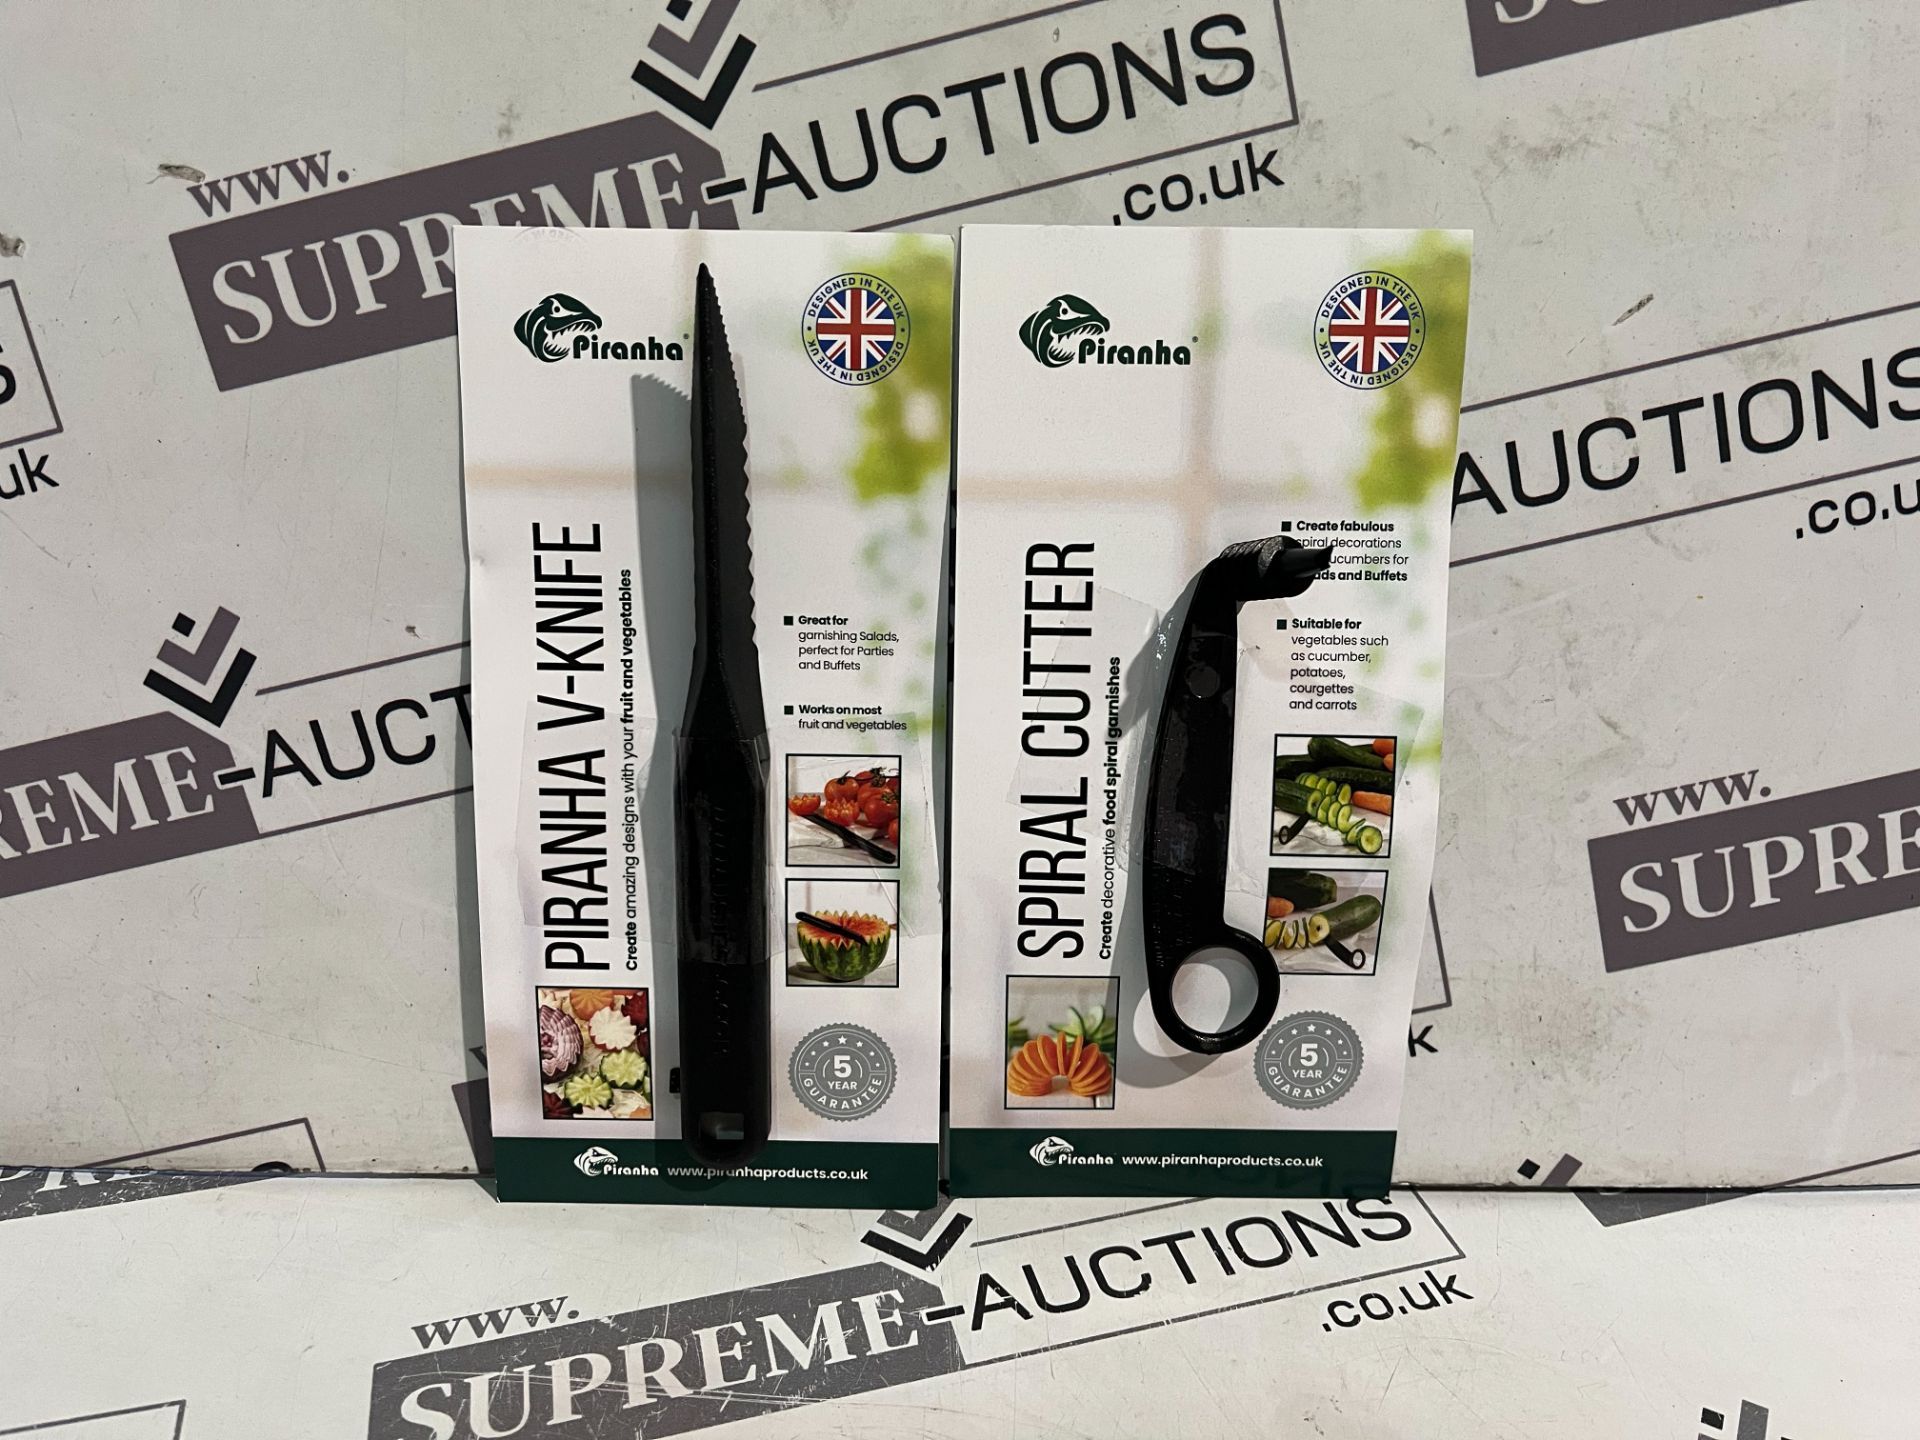 24 X BRAND NEW SETS OF 2 PIRANHA KITCHEN ACCESSORIES INCLUDING SPIRAL CUTTER AND PIRANHA V KNIVES (